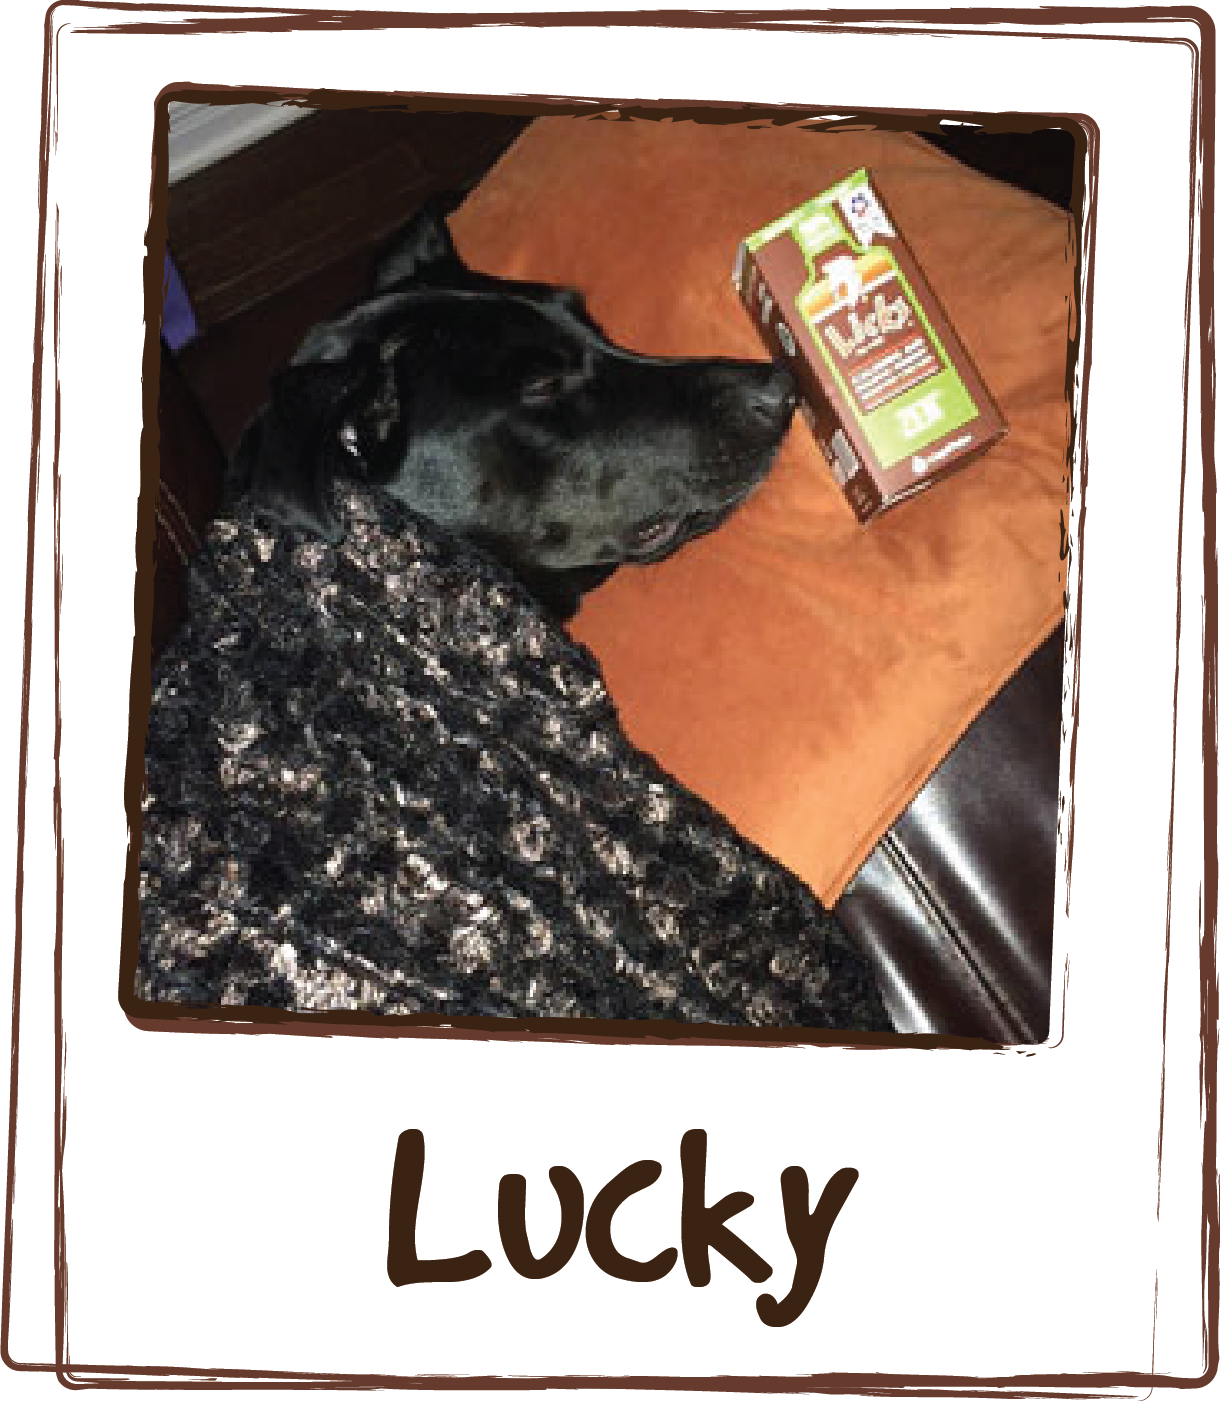  “We tried out LICKS – calming stuff and it works wonderfully! We had a bunch of people over last night and Lucky actually fell asleep on the couch and we gave her a pillow and blanket! She was more than ‘Zen.’” 